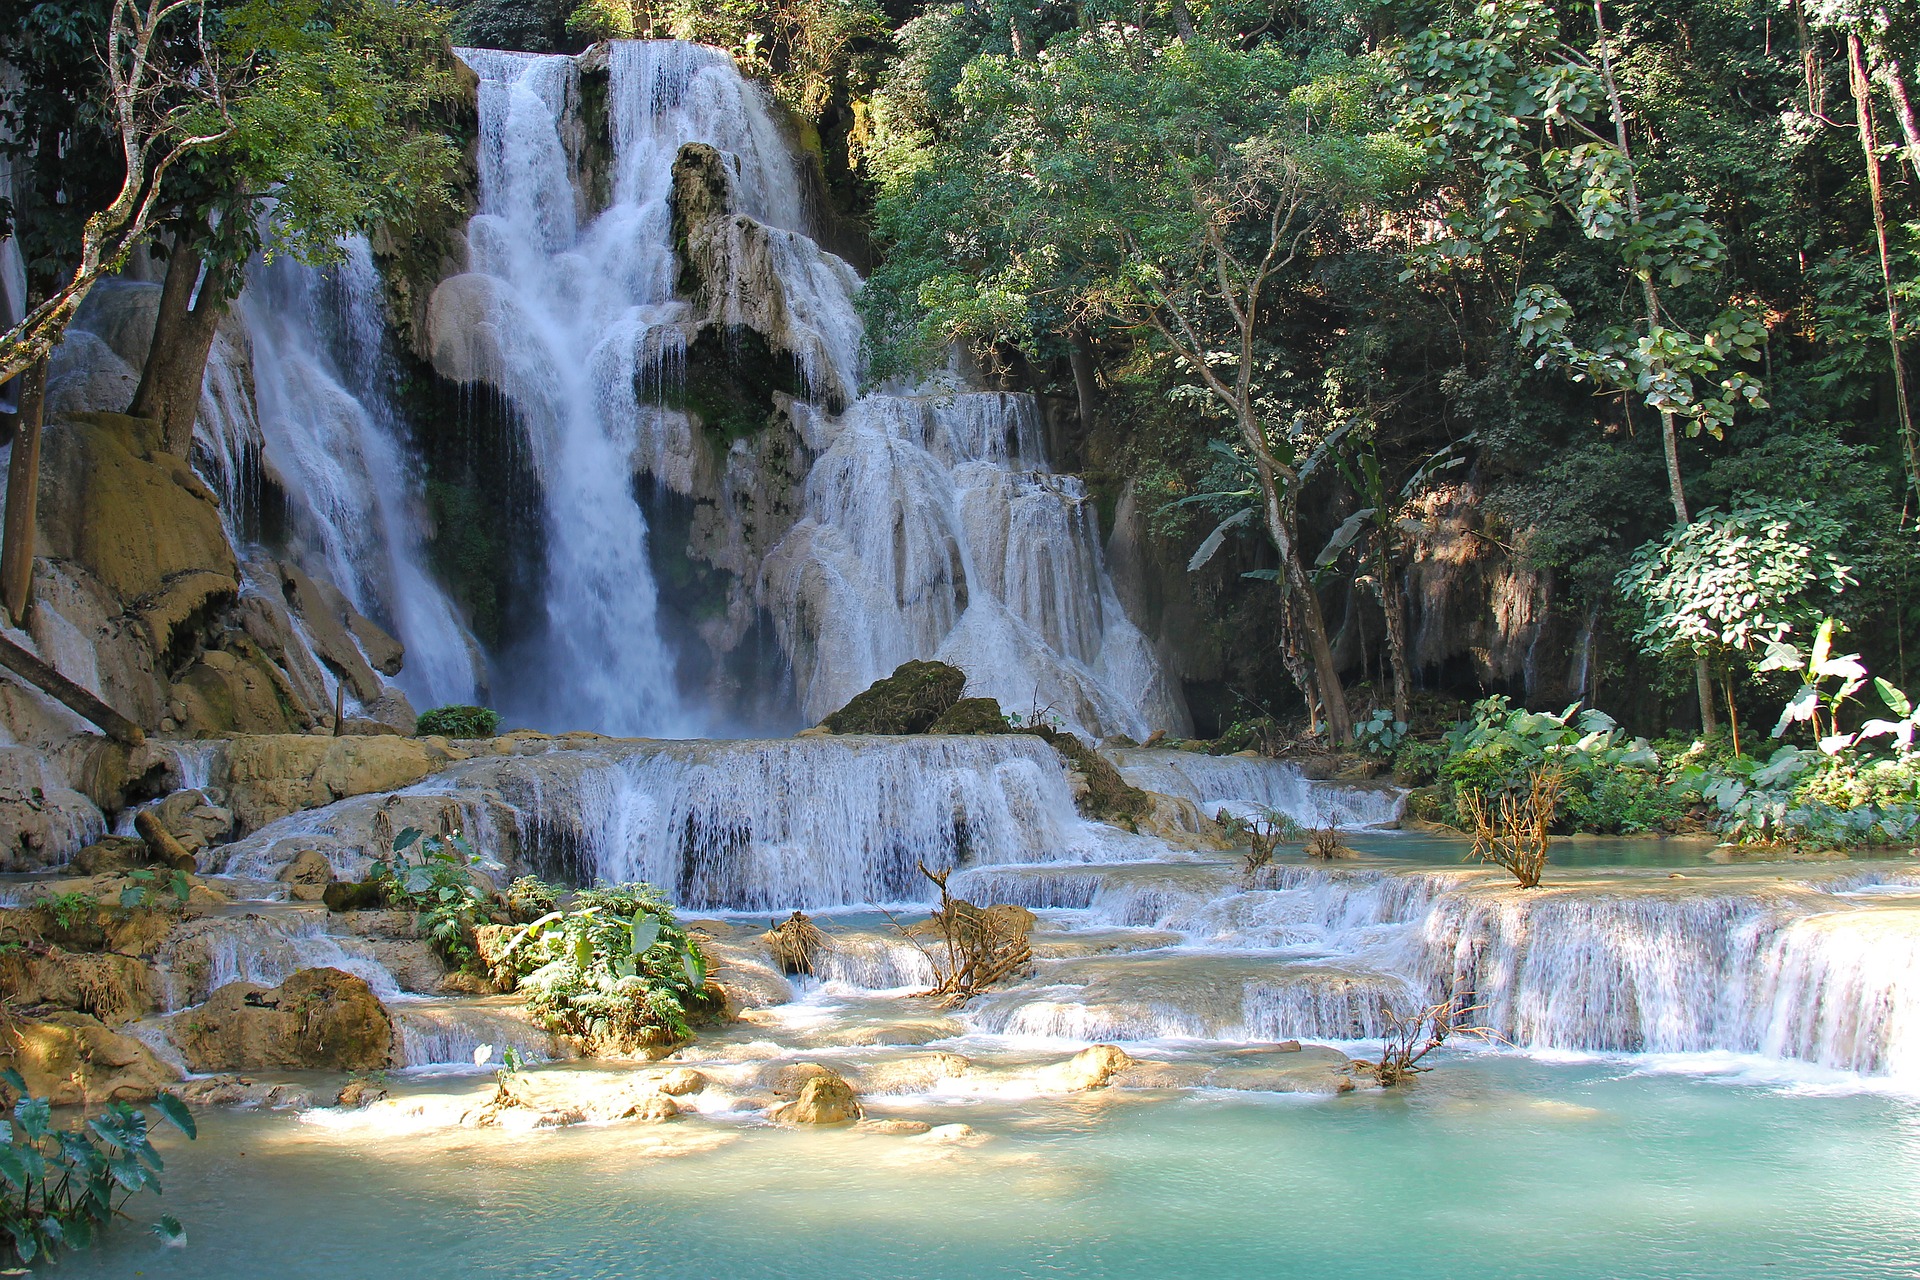 The Kuang Si Falls are known for their beautiful blue water, half of the year